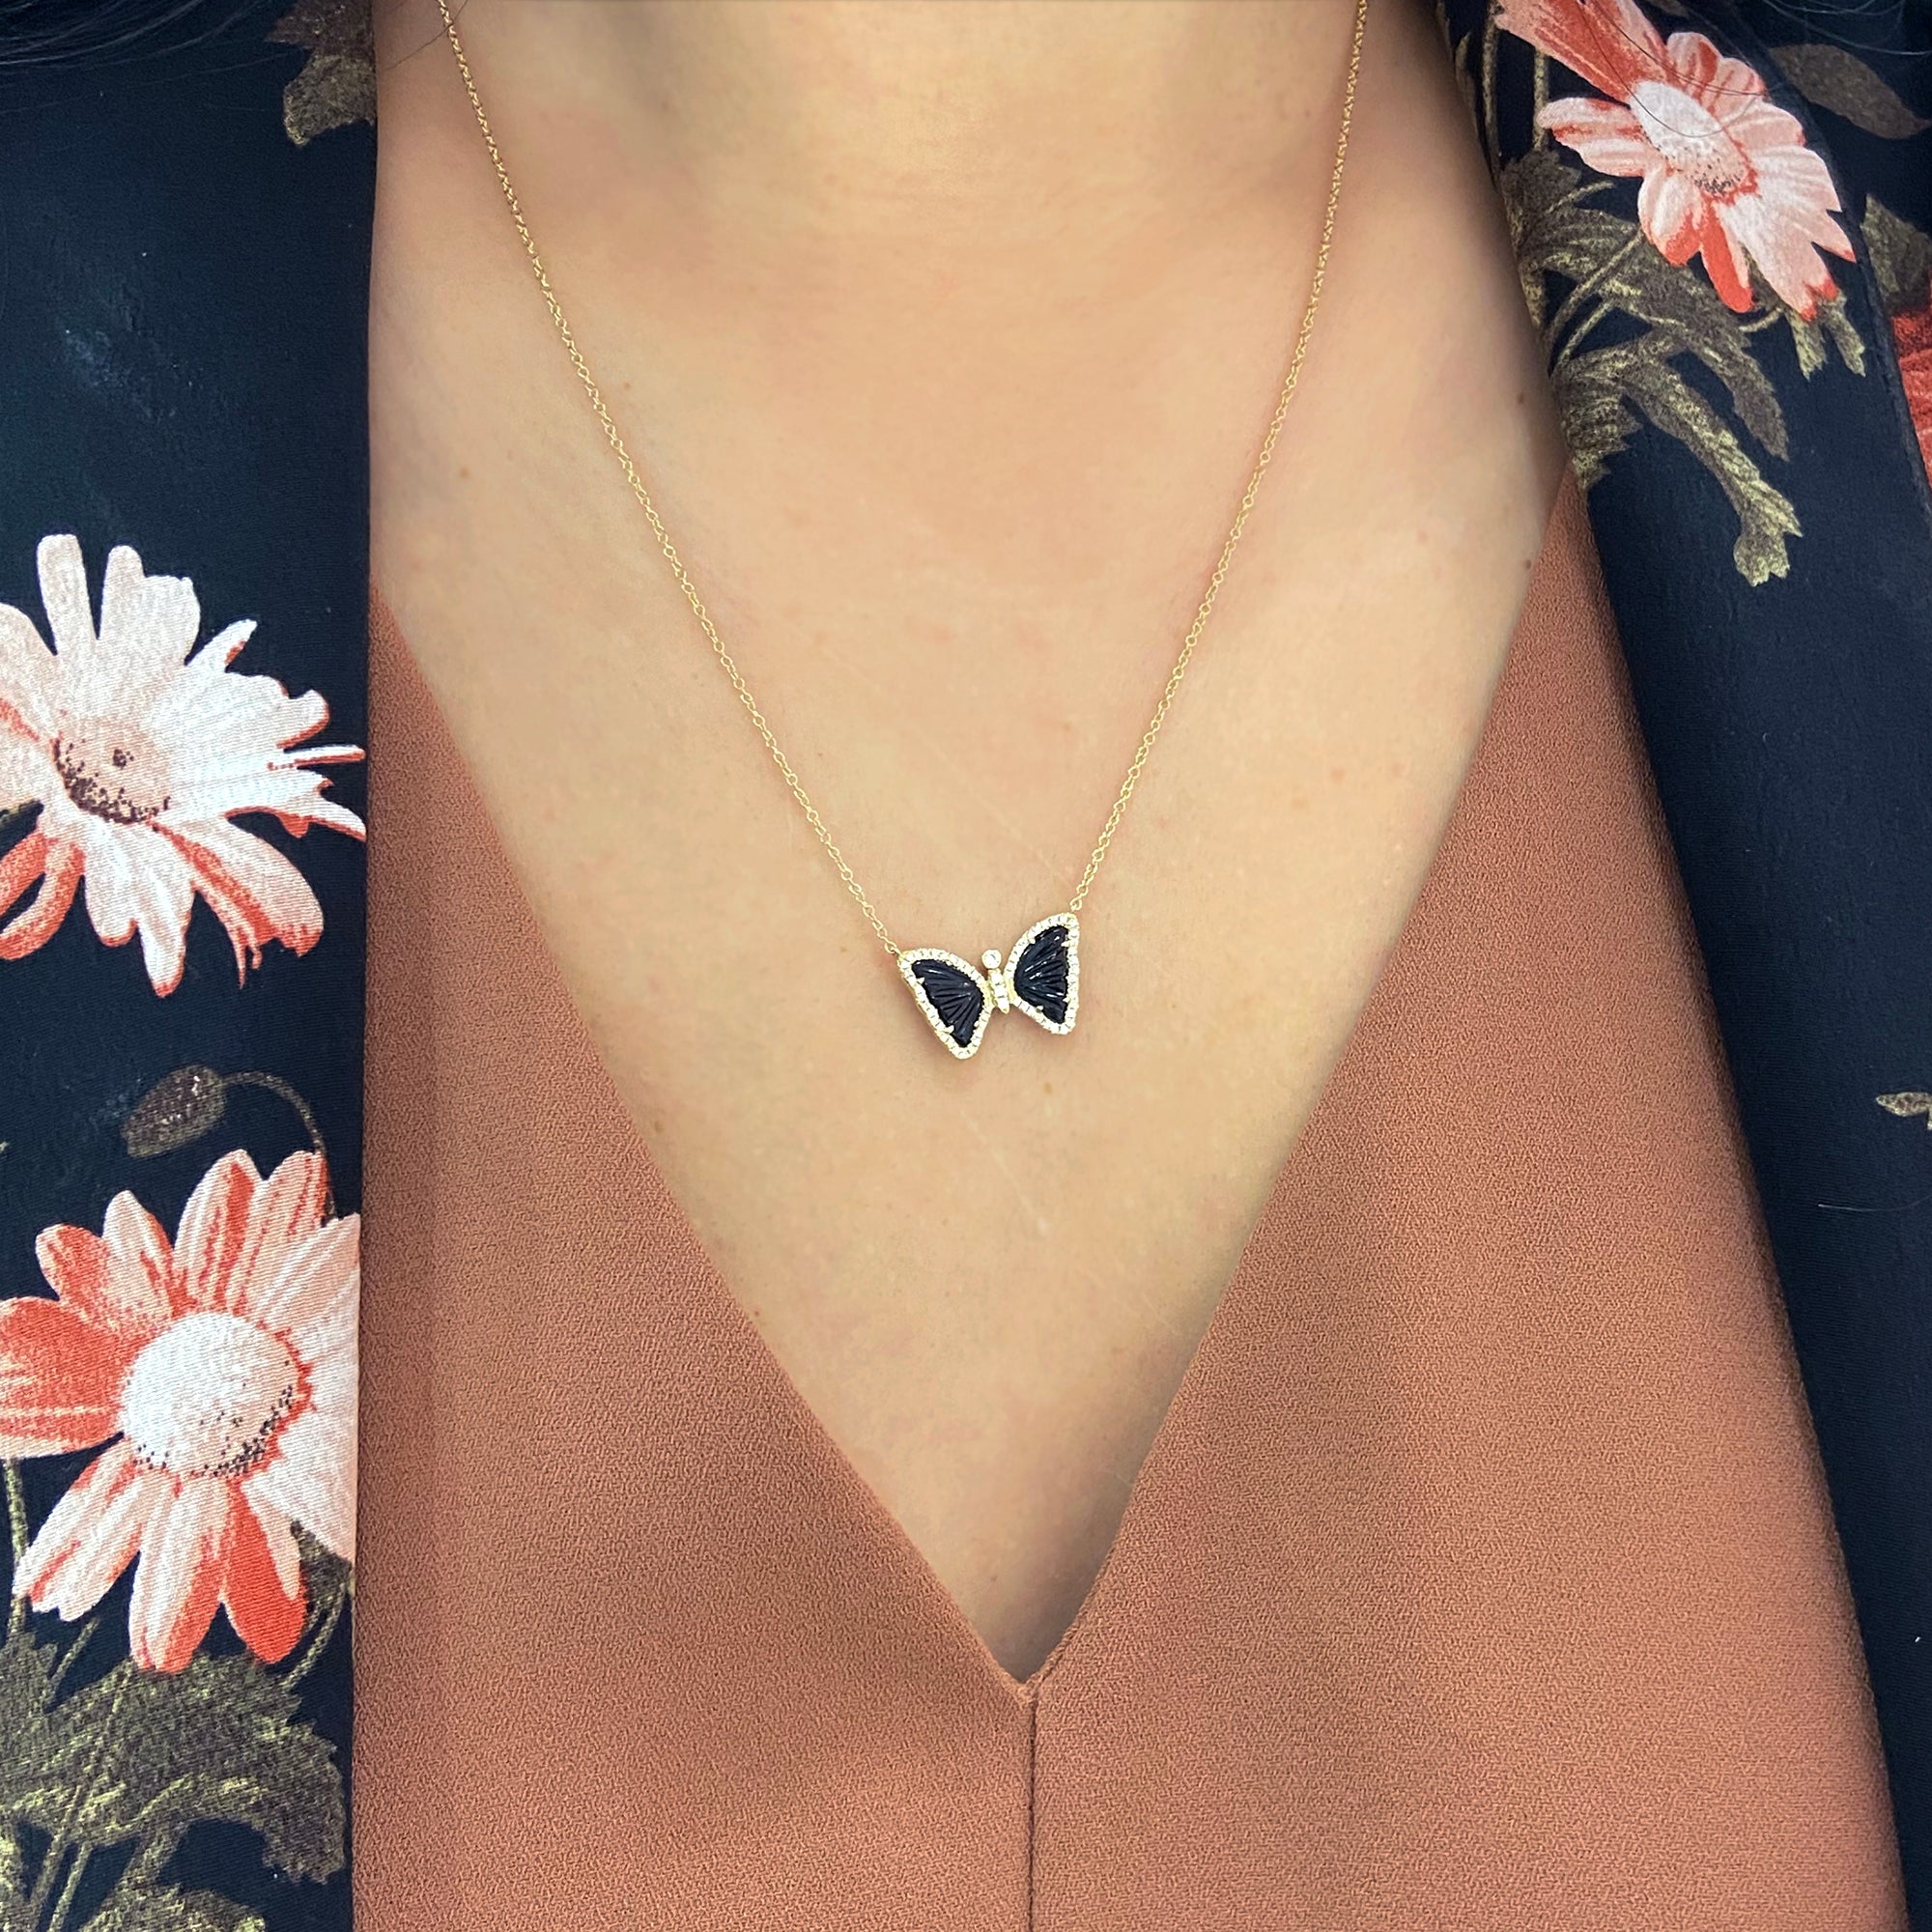 mini butterfly necklace with diamonds with black onyx